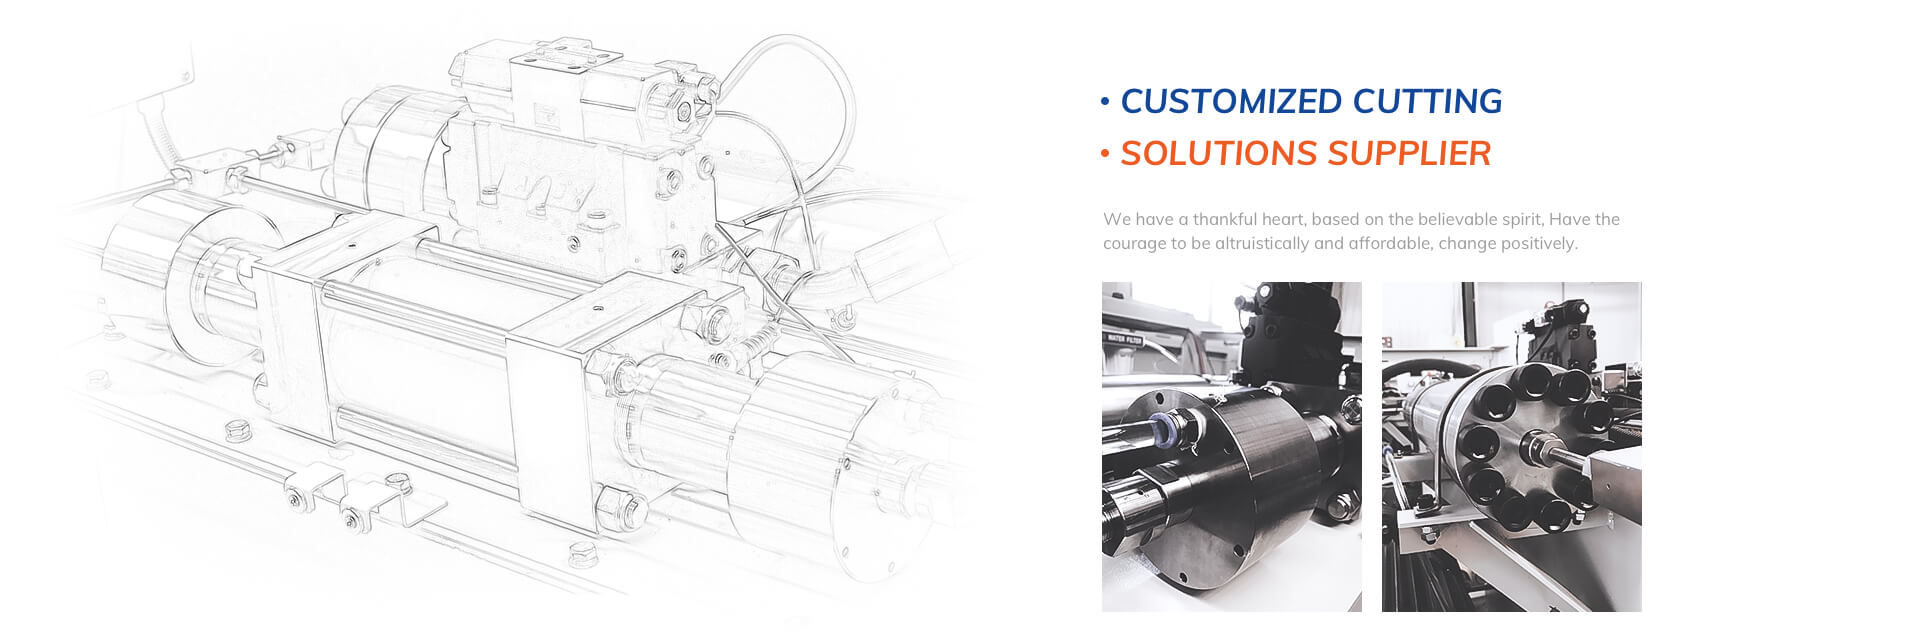 Customized Cutting Solutions Supplier